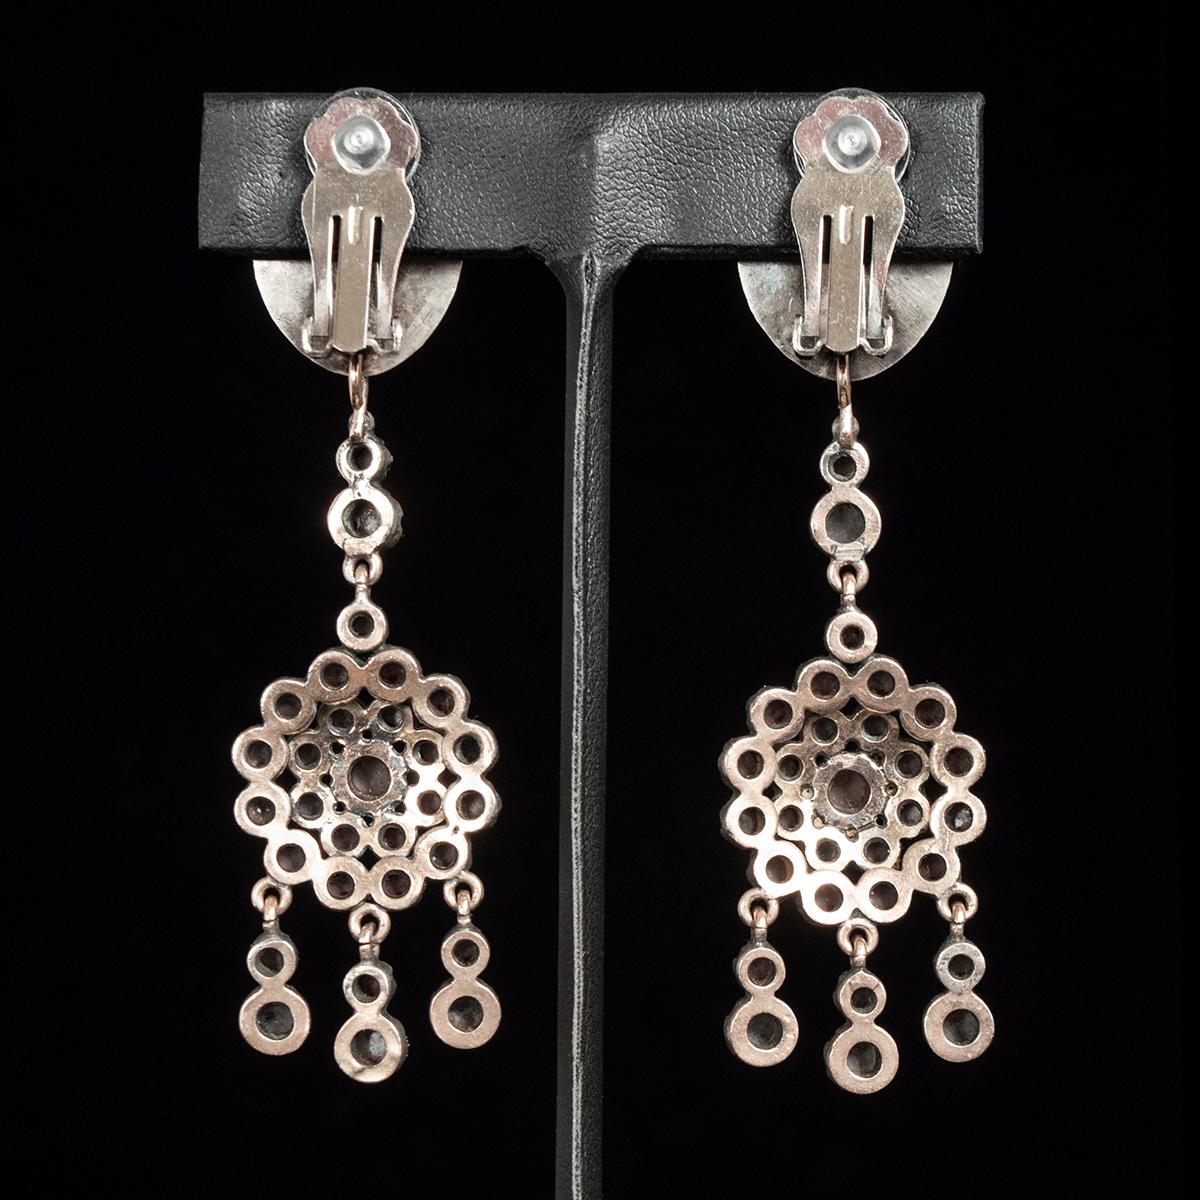 Sparkling Silver and Glass South Indian Drop Earrings by Jewels of Santa Fe In Good Condition For Sale In Point Richmond, CA